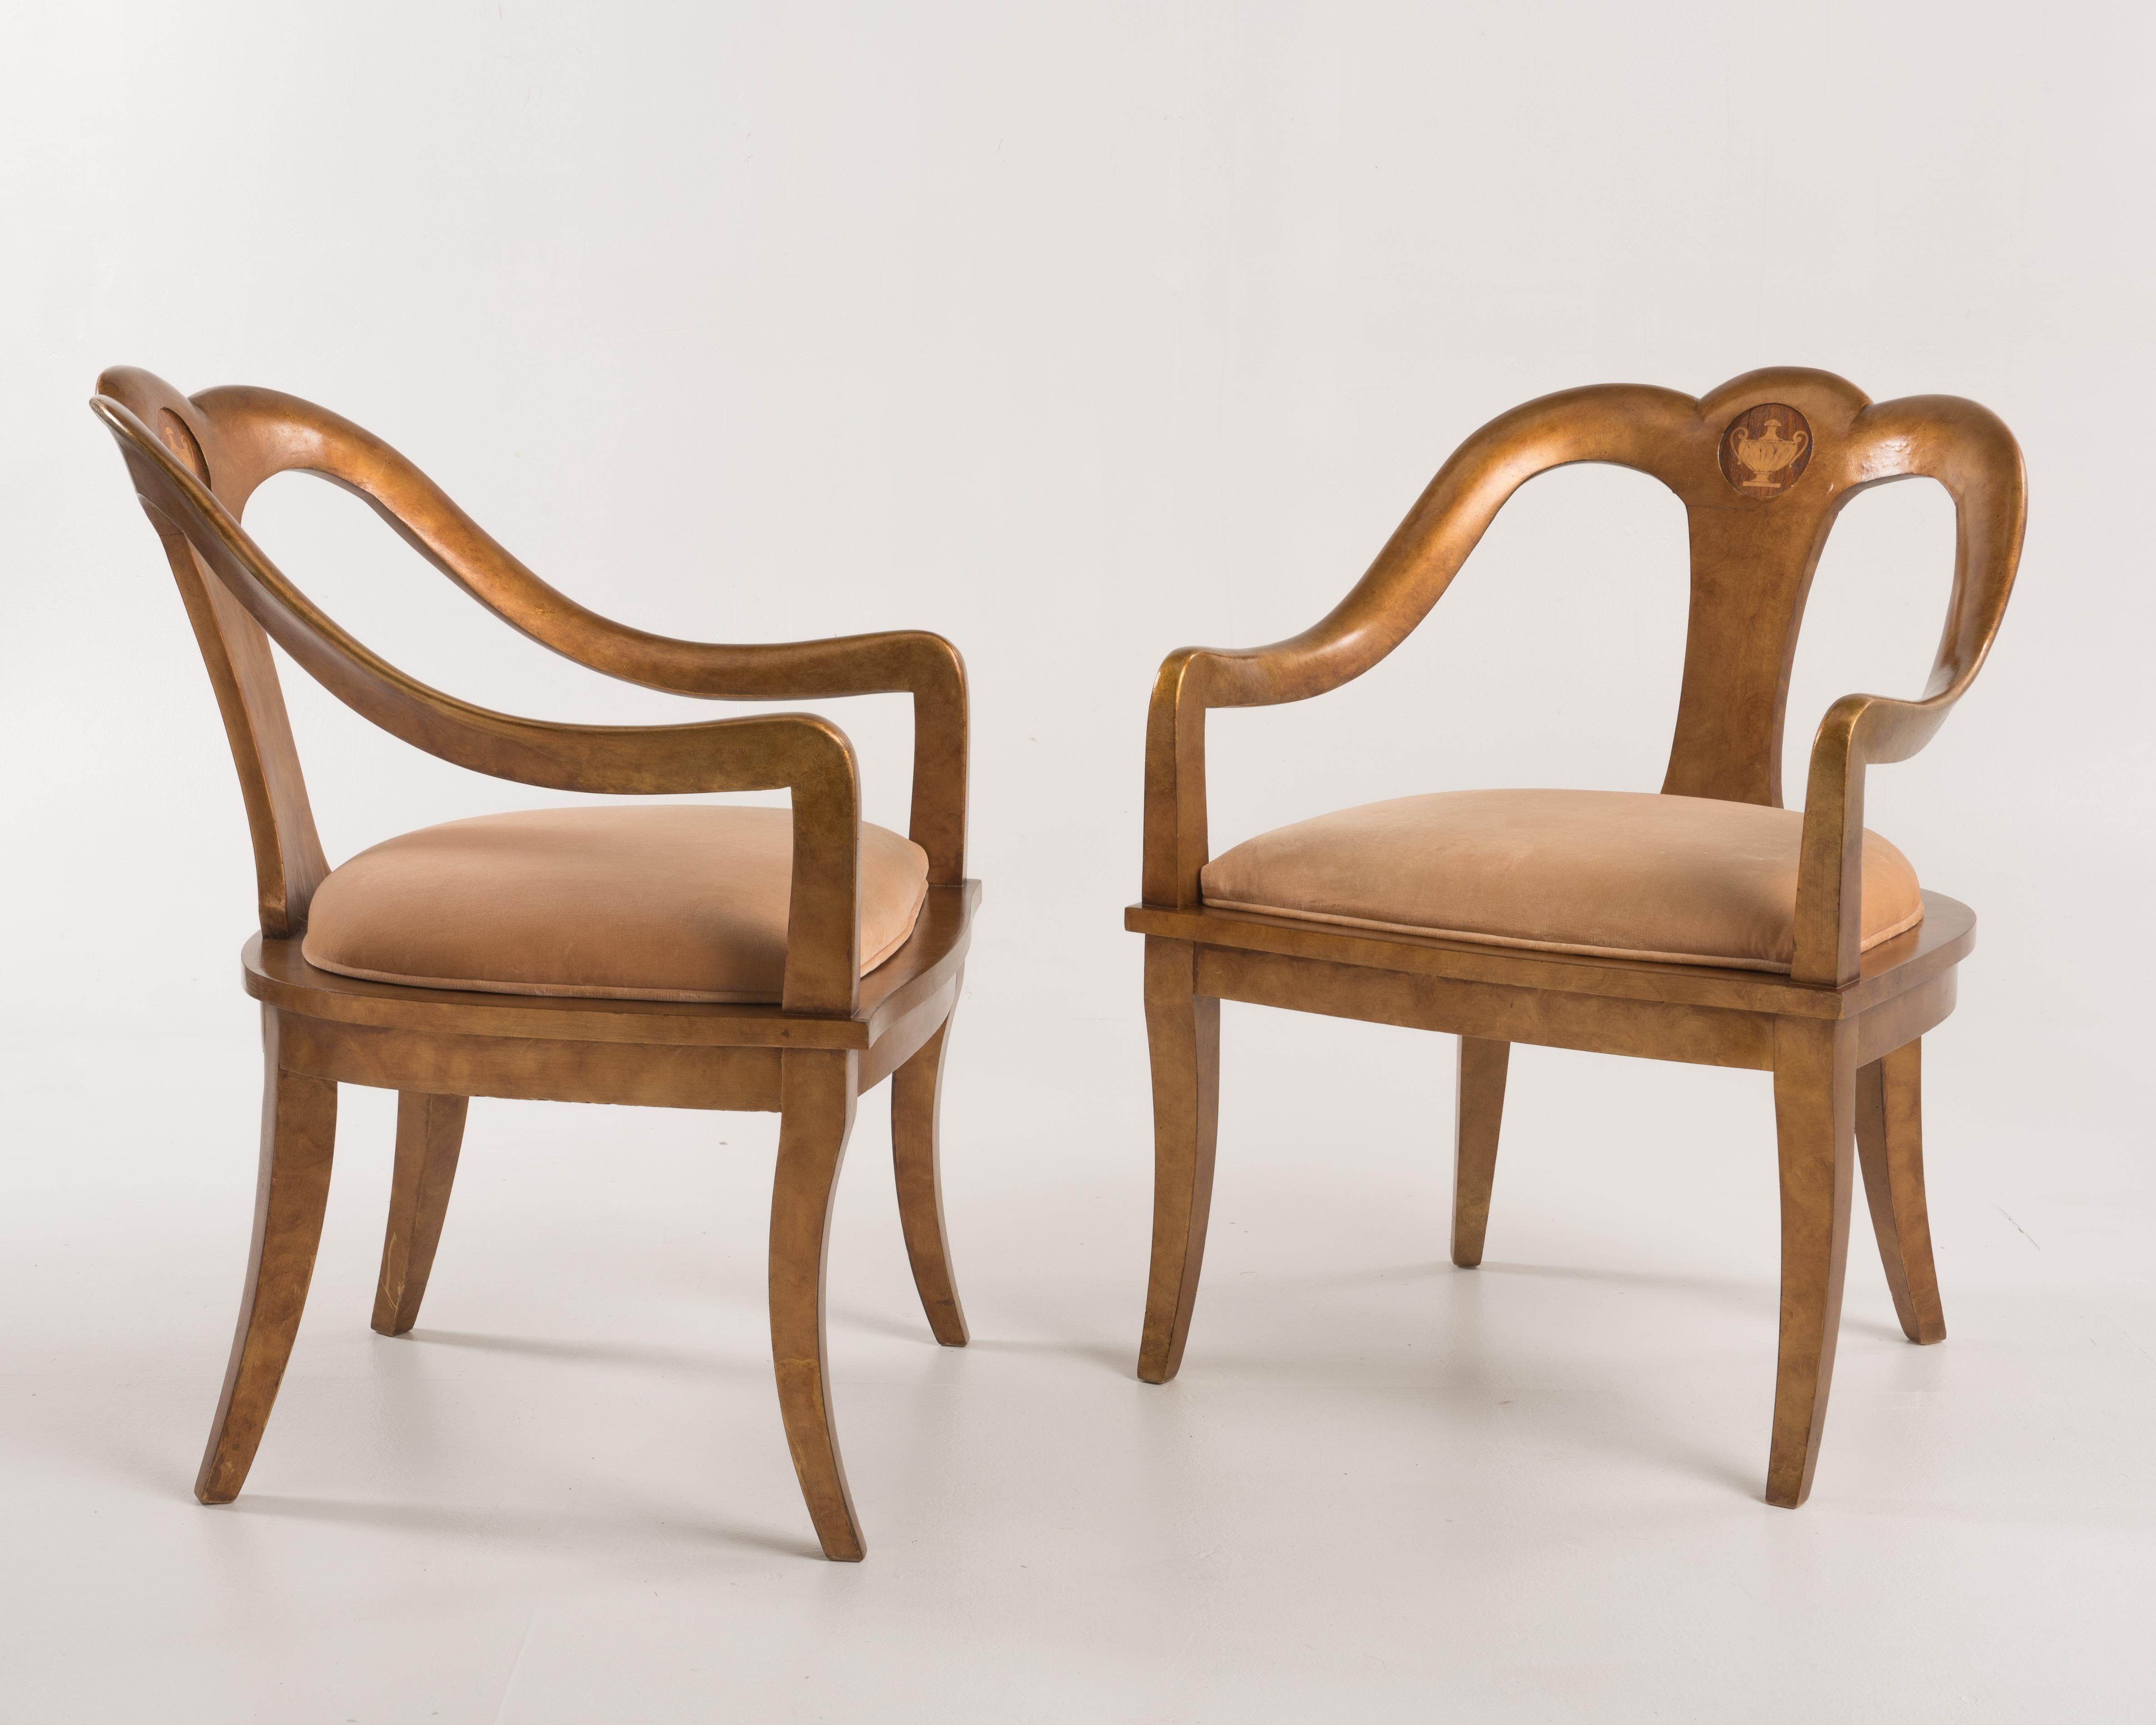 A pair of antique spoon back or Roman armchairs in a mottled gold finish. The chairs have a wonderful gold finish, cane seats and a center medallion with an urn inlay.